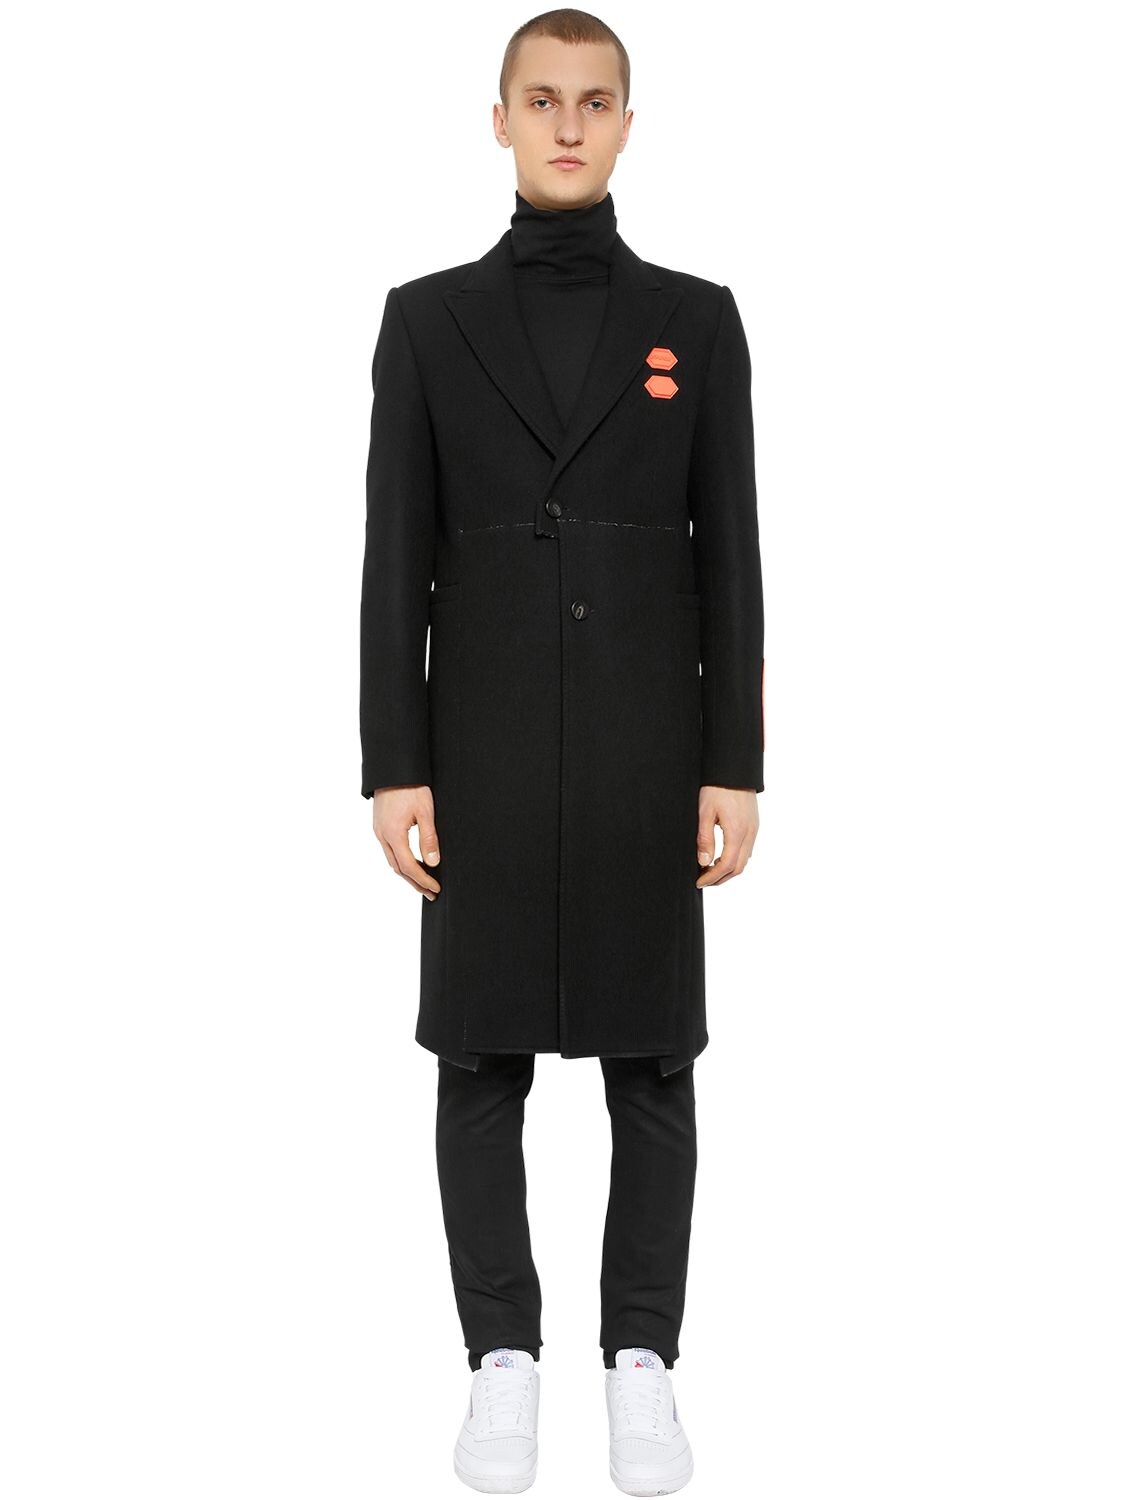 OFF-WHITE LOGO PATCHES WOOL BLEND CLOTH COAT,68IJRD027-MTAwMA2